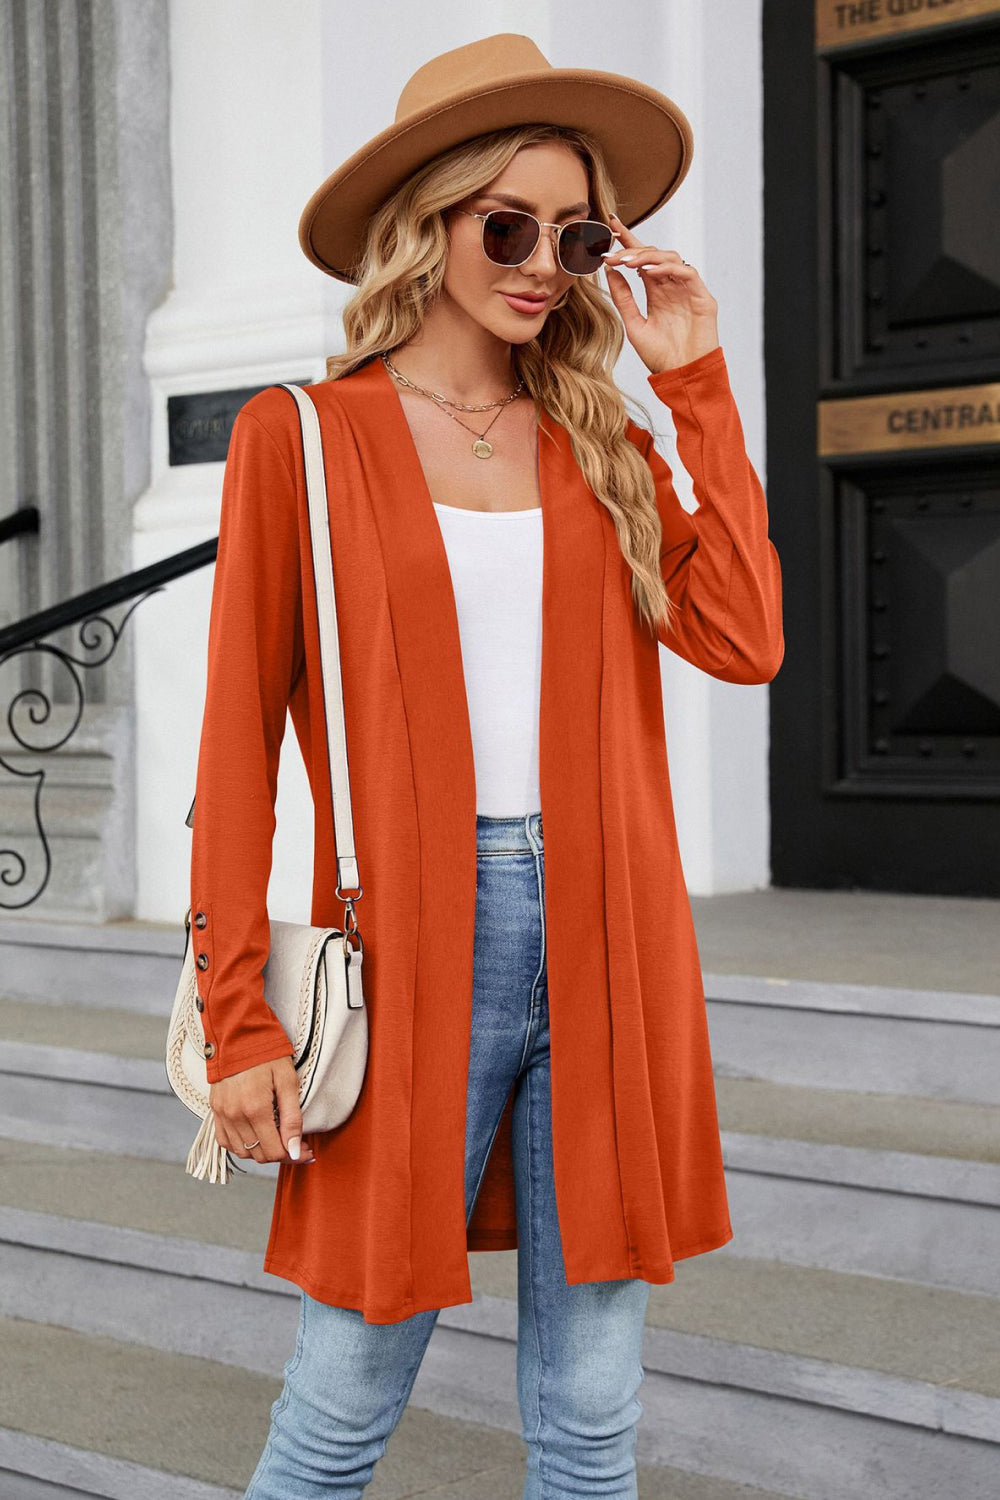 Long Sleeve Open Front Cardigan - Orange / S - Women’s Clothing & Accessories - Shirts & Tops - 4 - 2024